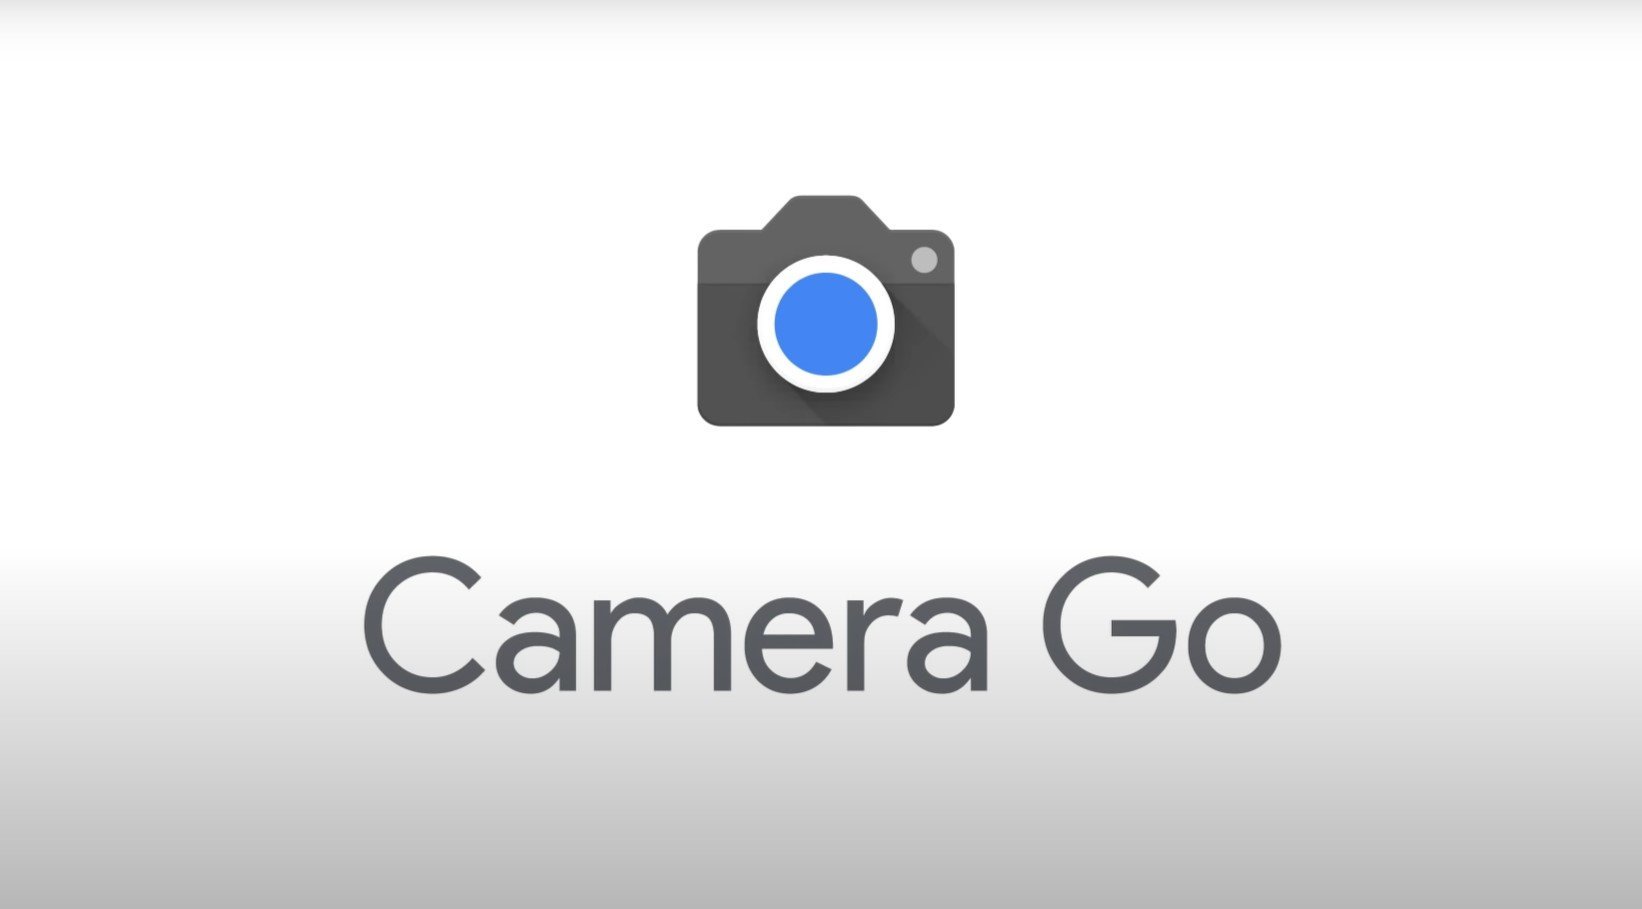 A new build of the GCam Go application has become available for a wide range of smartphones